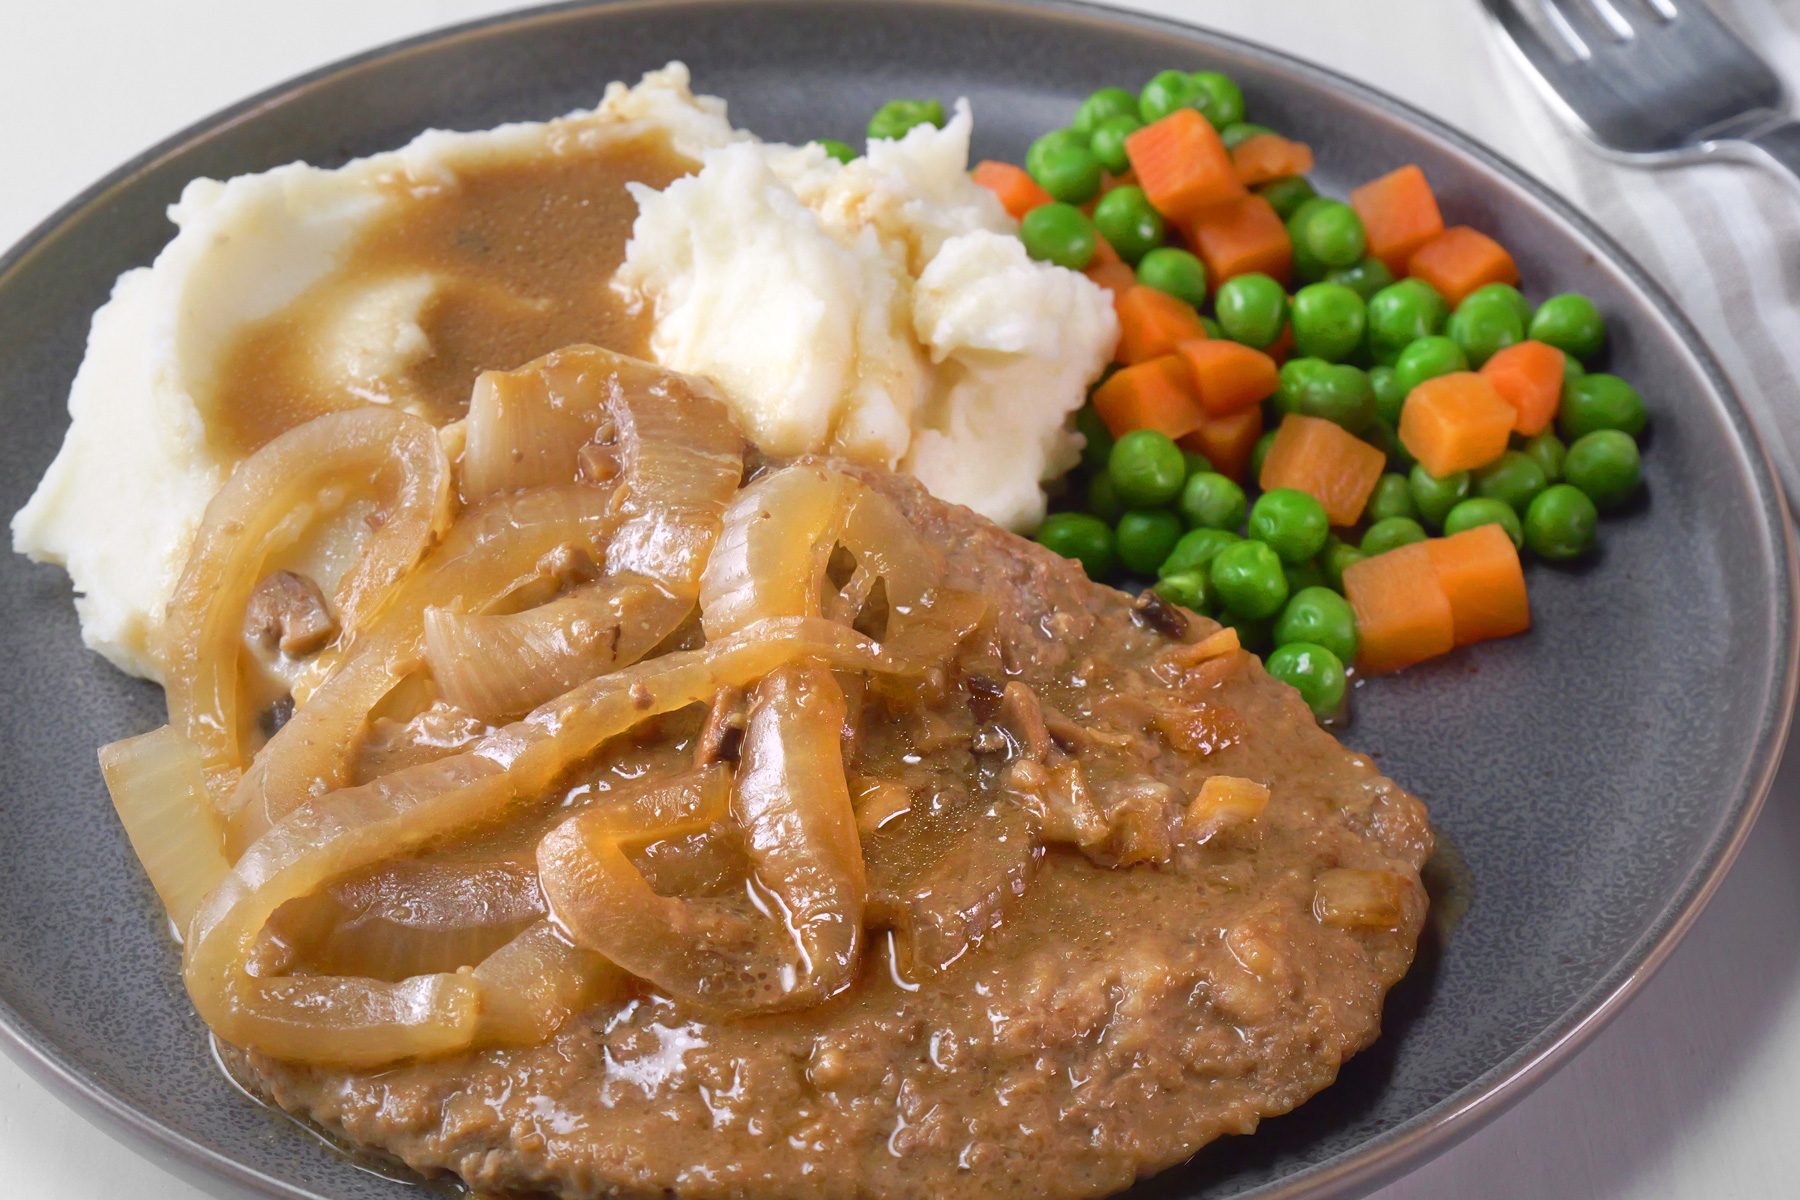 A plate of cube steaks with gravy served over mashed potatoes along with boiled peas and carrot cubes